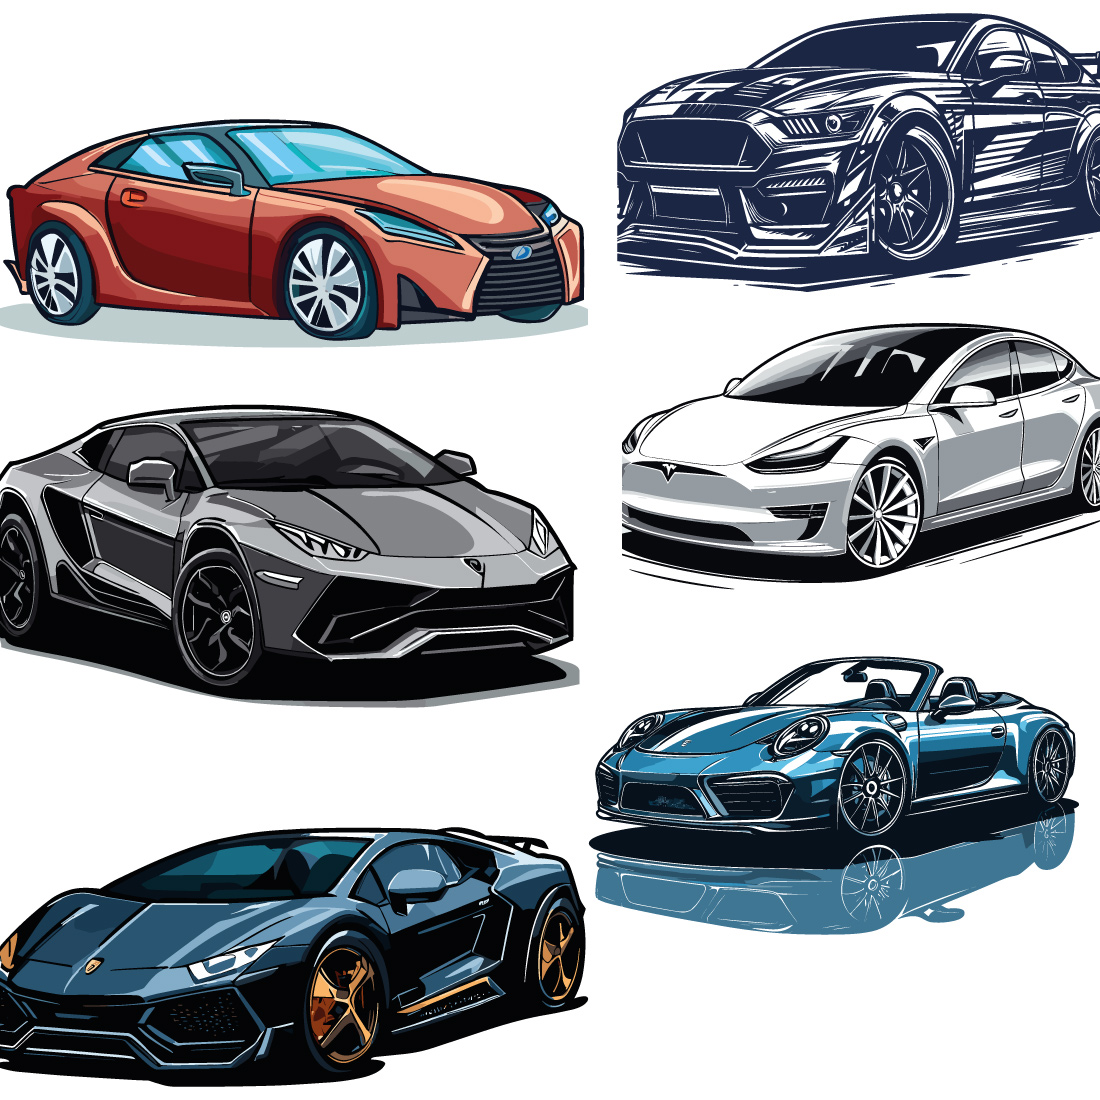 Sports cars for competition Transport for fast driving in races preview image.